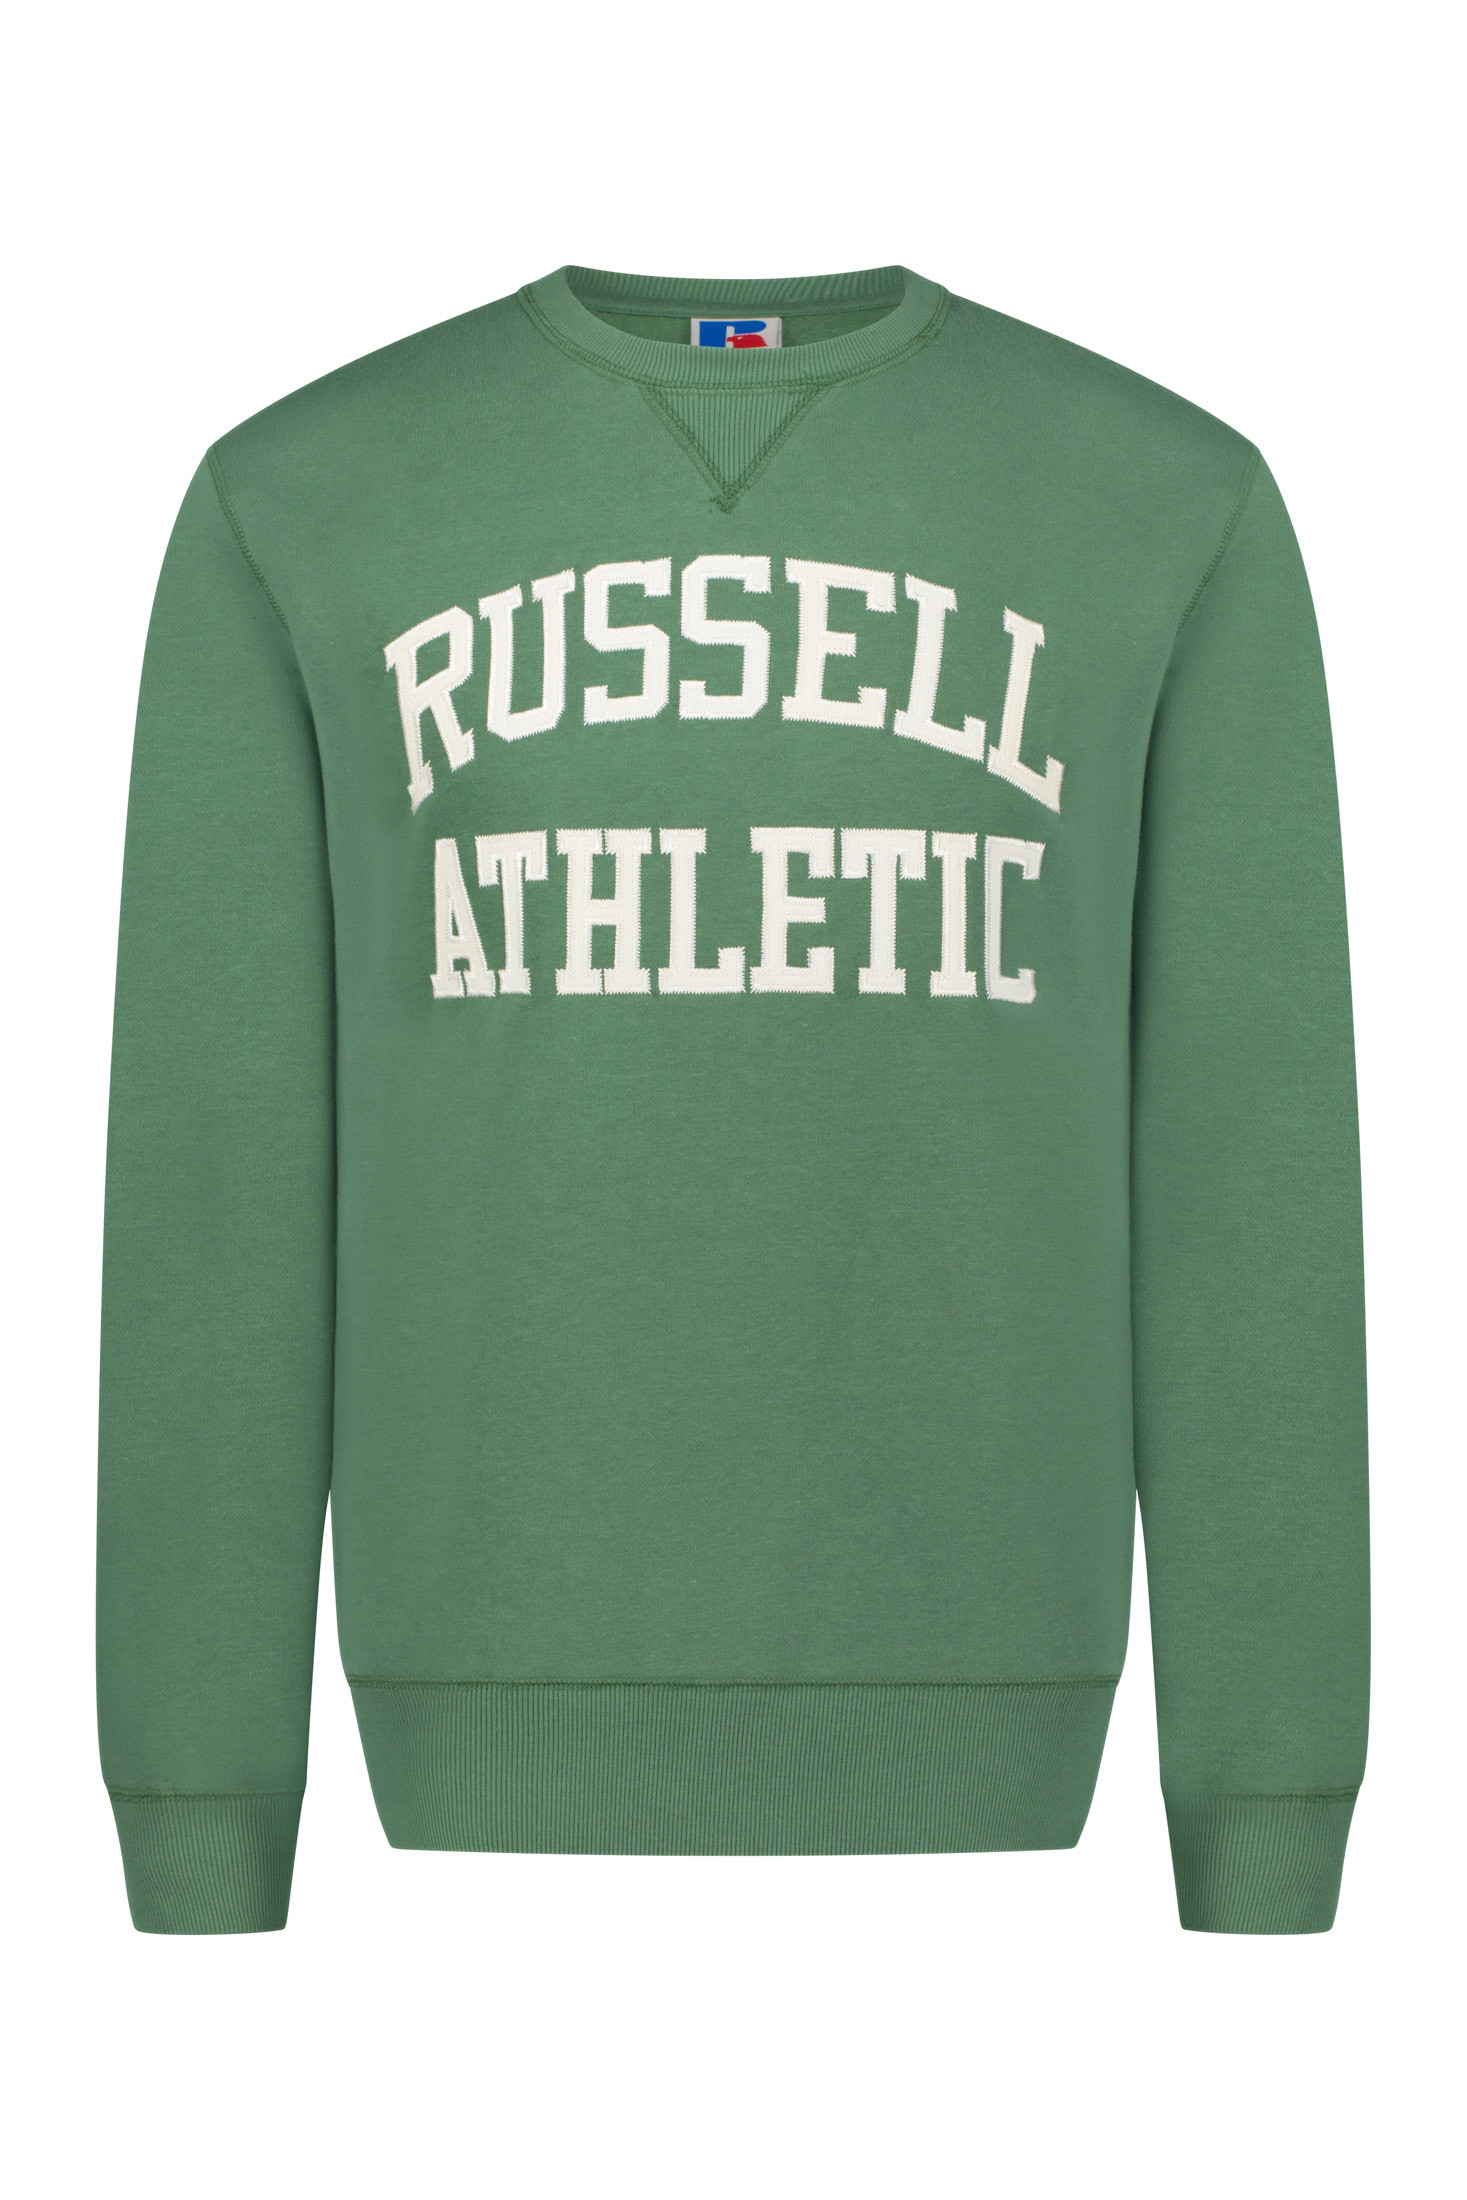 Russell Athletic - Sweatshirt with embroidery, Light Green, large image number 0